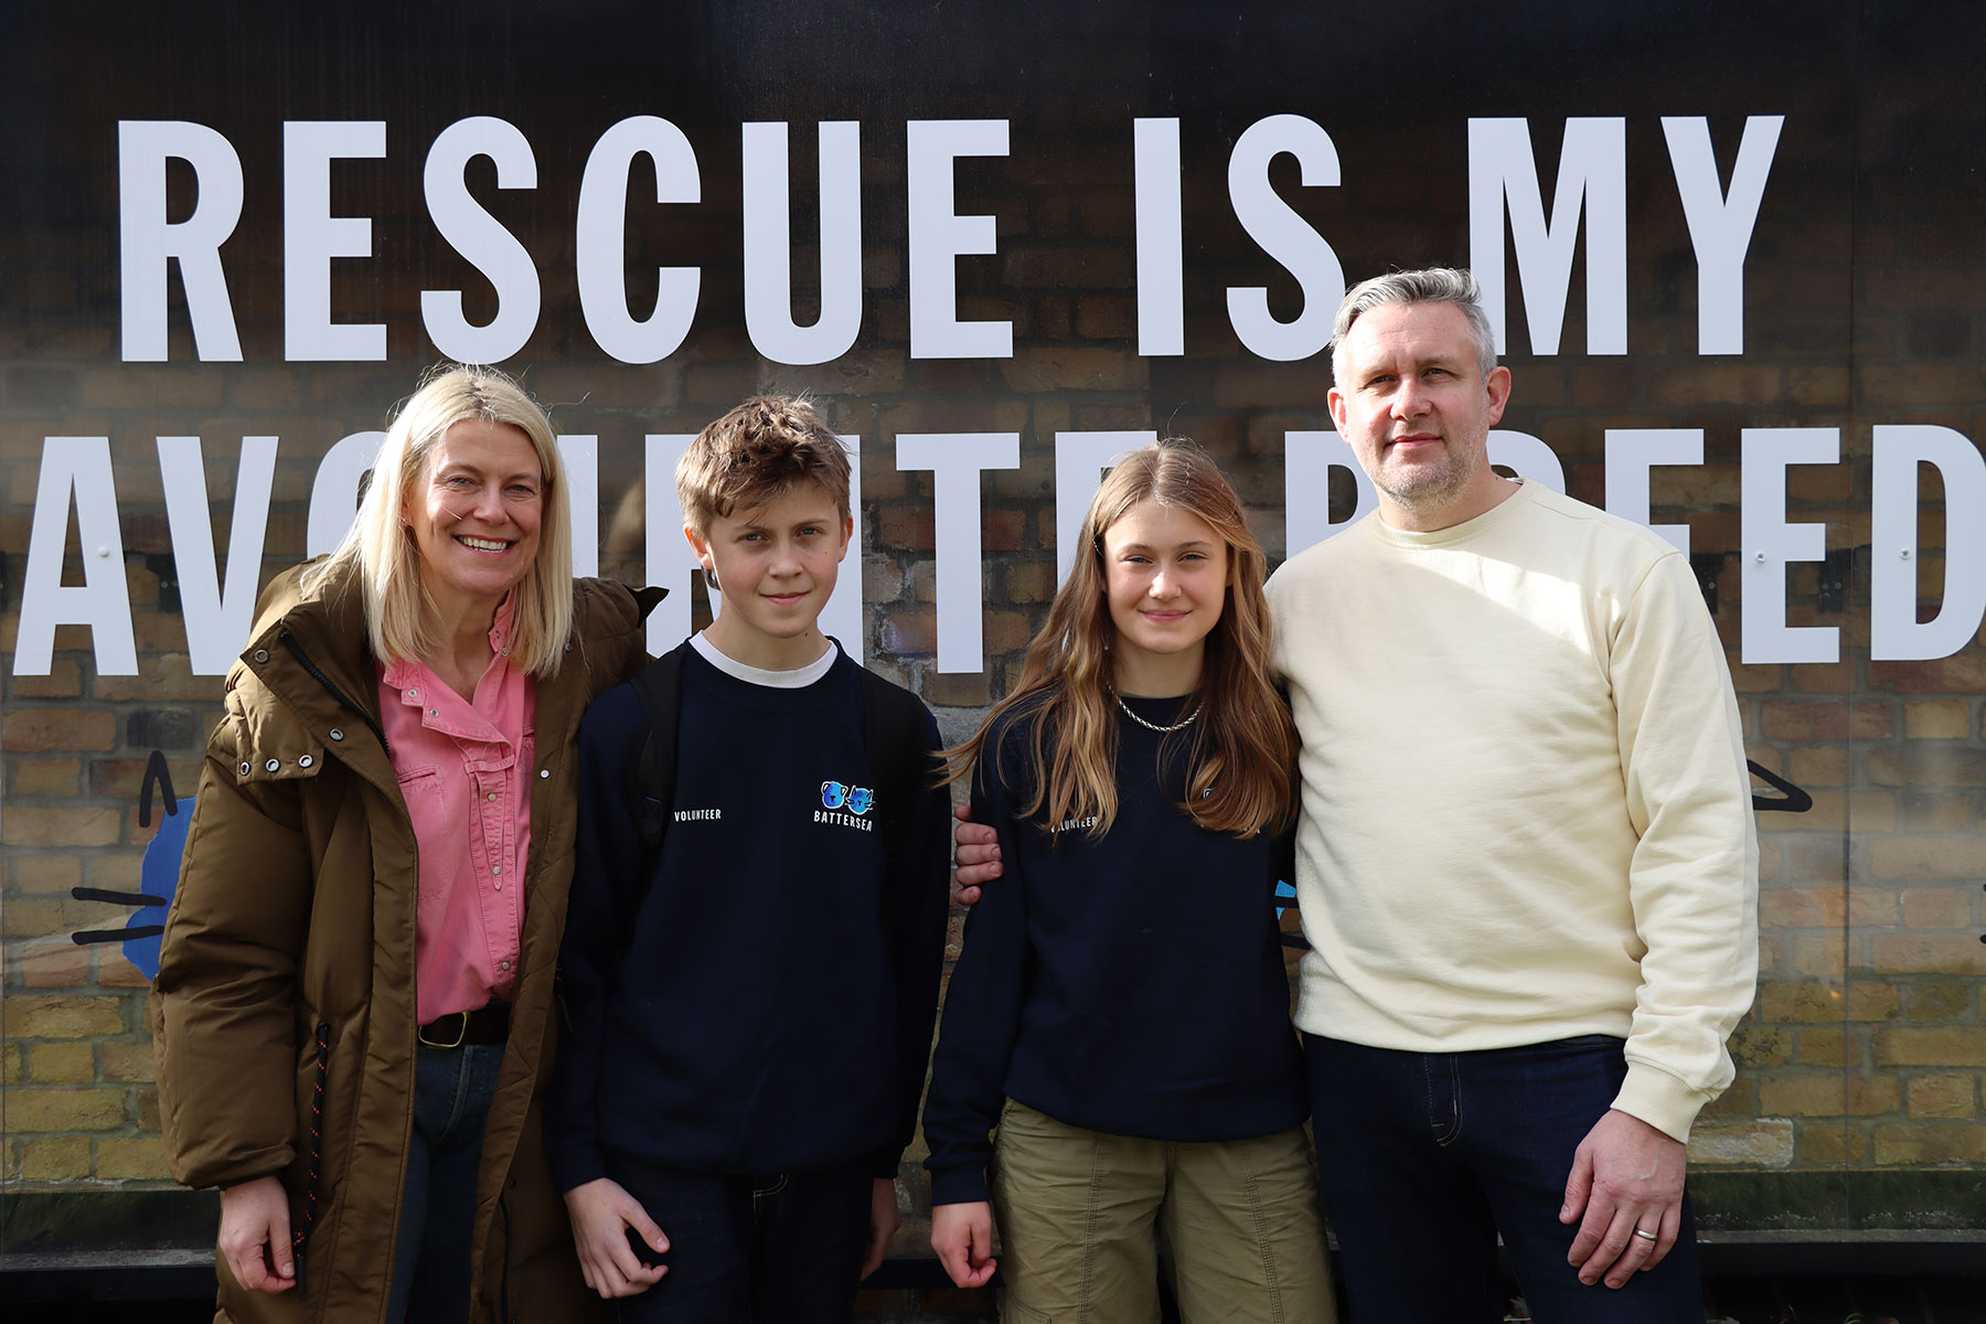 Leila and her family in front of a sign saying 'Rescue is my favourite breed'.